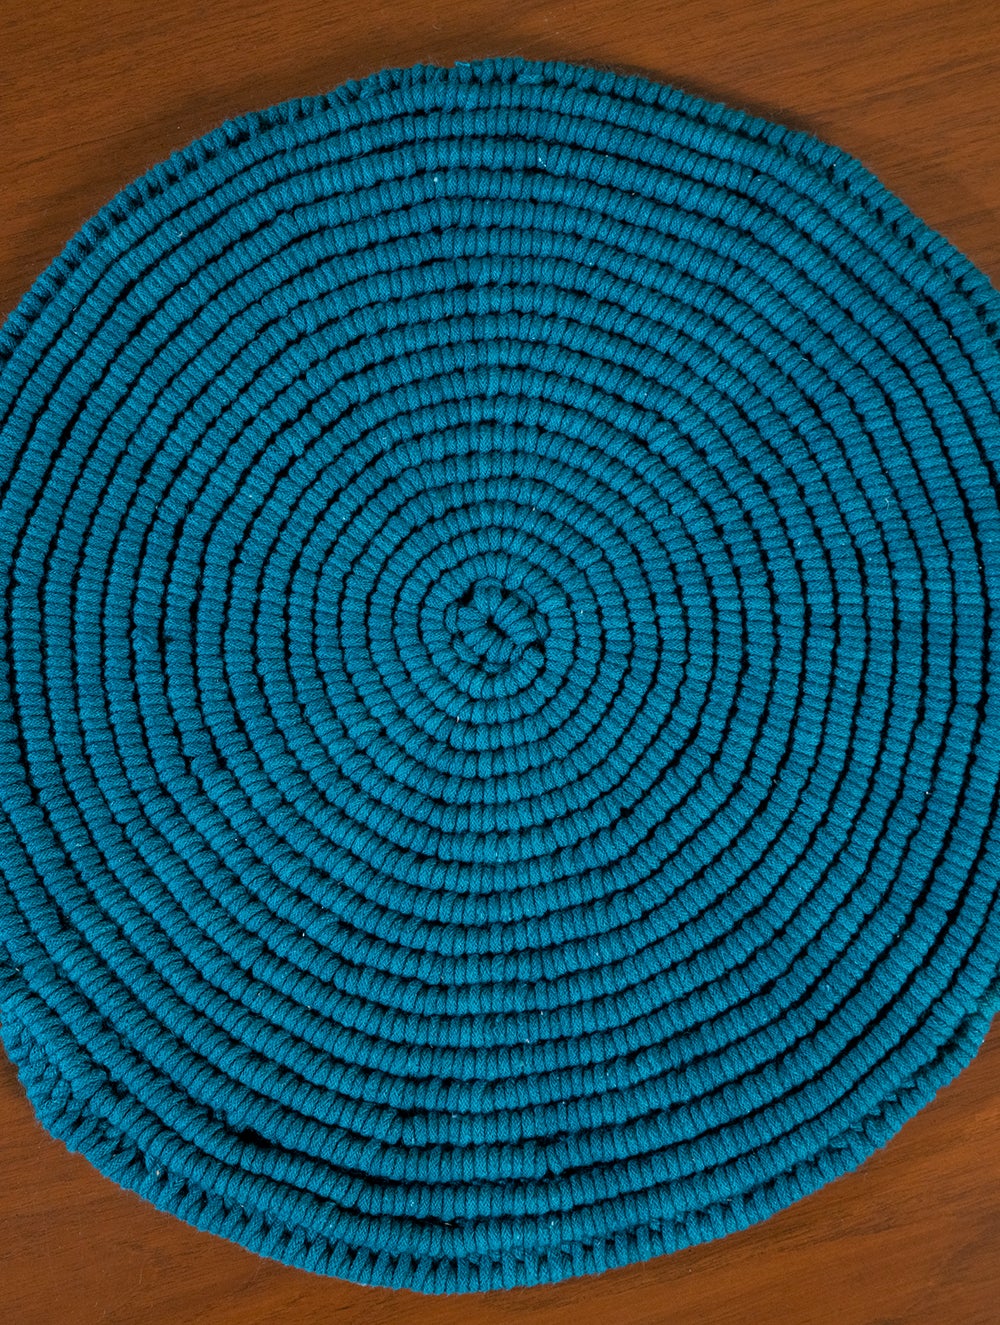 Load image into Gallery viewer, Handknotted Macramé Large Round Mats (Set of 2) - Blue